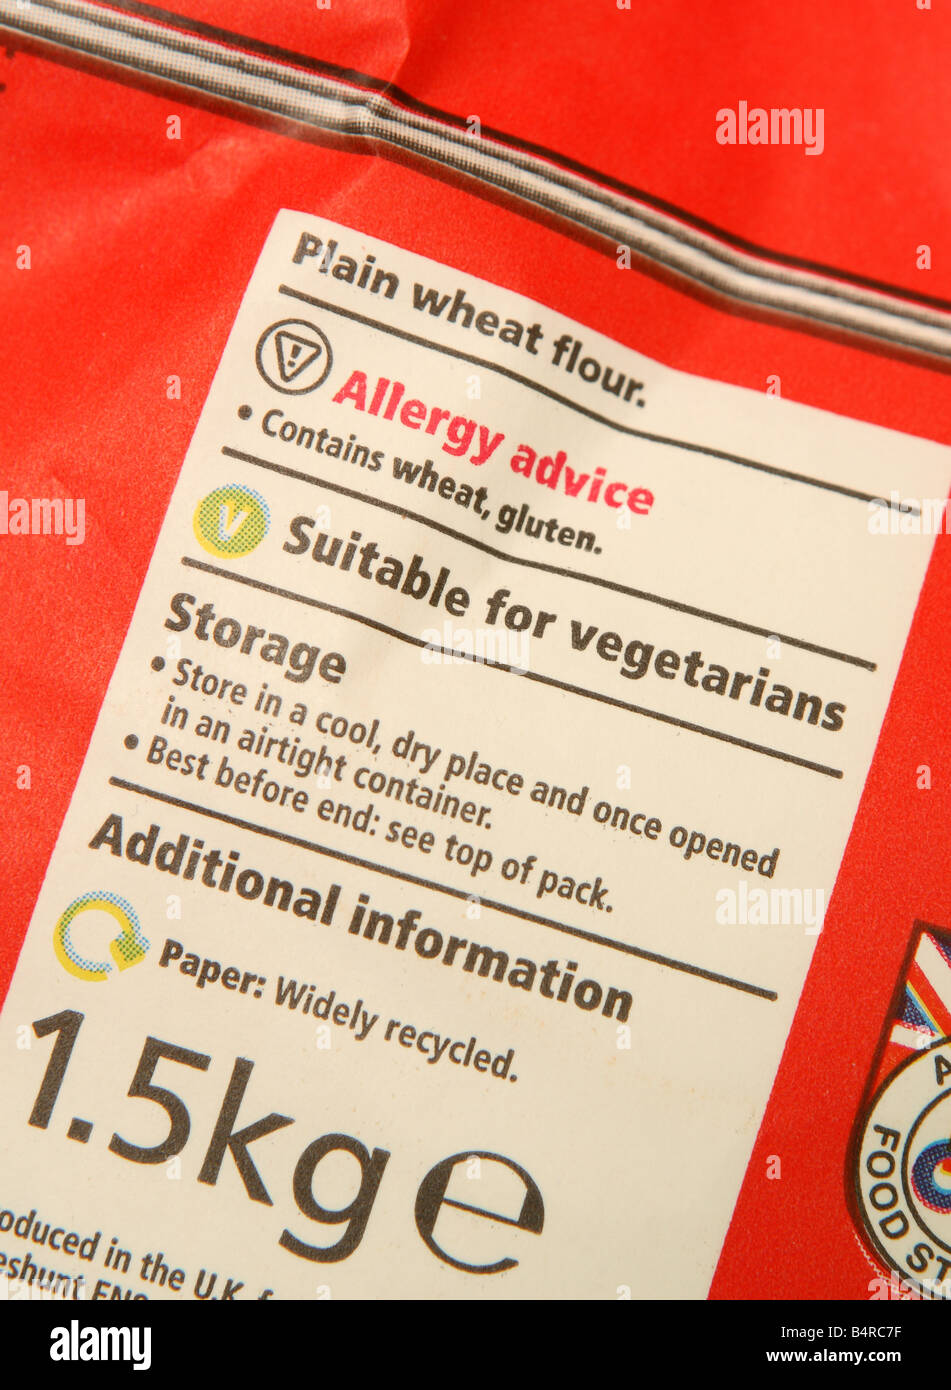 Food allergy product packaging contents label with advice warning on ...